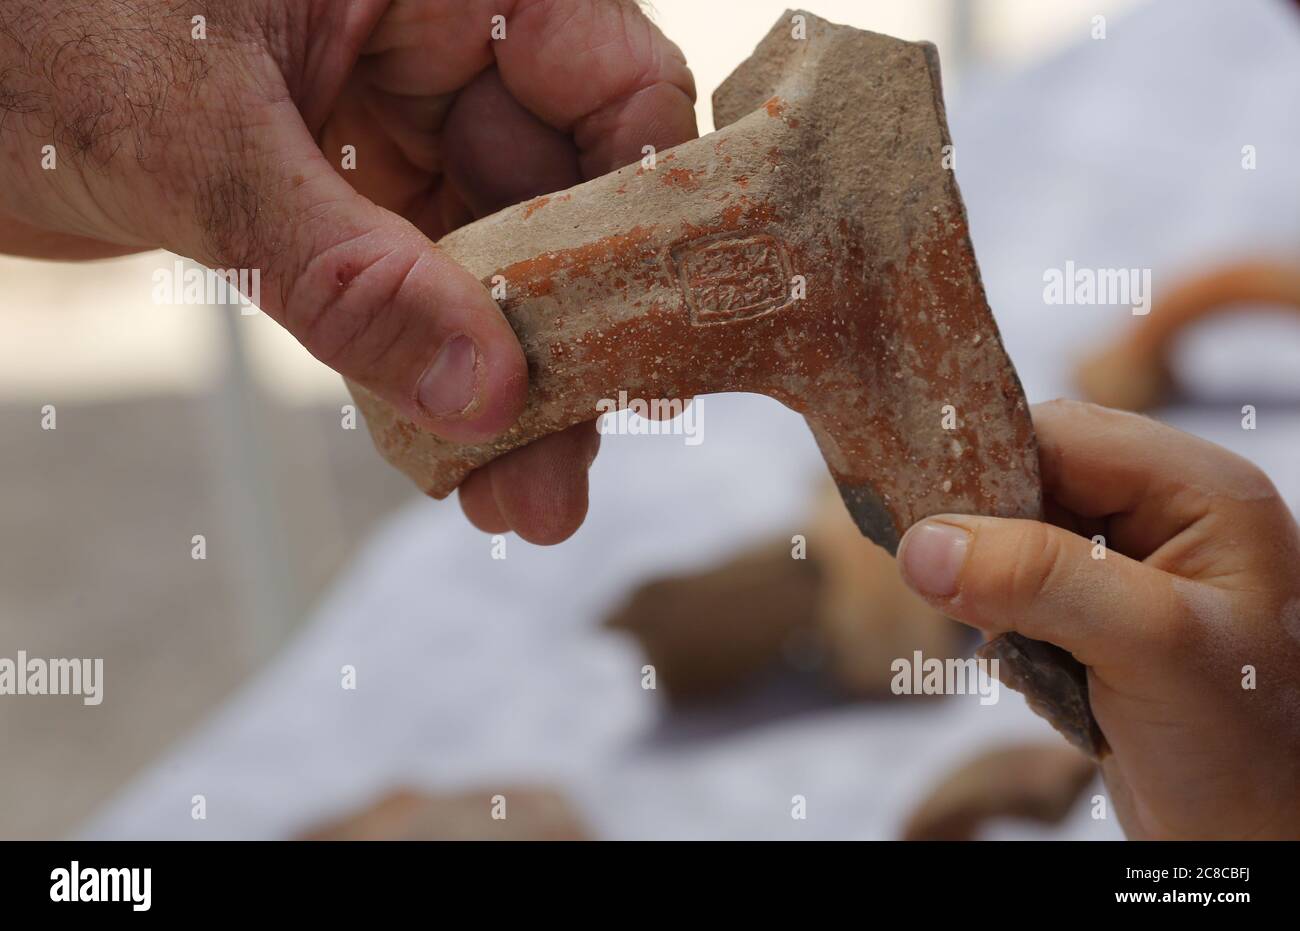 (200723) -- JERUSALEM, July 23, 2020 (Xinhua) -- An archeologist shows a seal impression bearing ancient Hebrew script unearthed at an excavation site in Jerusalem on July 22, 2020. Israeli archaeologists have discovered a 2,700-year-old administrative storage center in Jerusalem, the Israel Antiquities Authority (IAA) said on Wednesday. (Photo by Gil Cohen Magen/Xinhua) Stock Photo